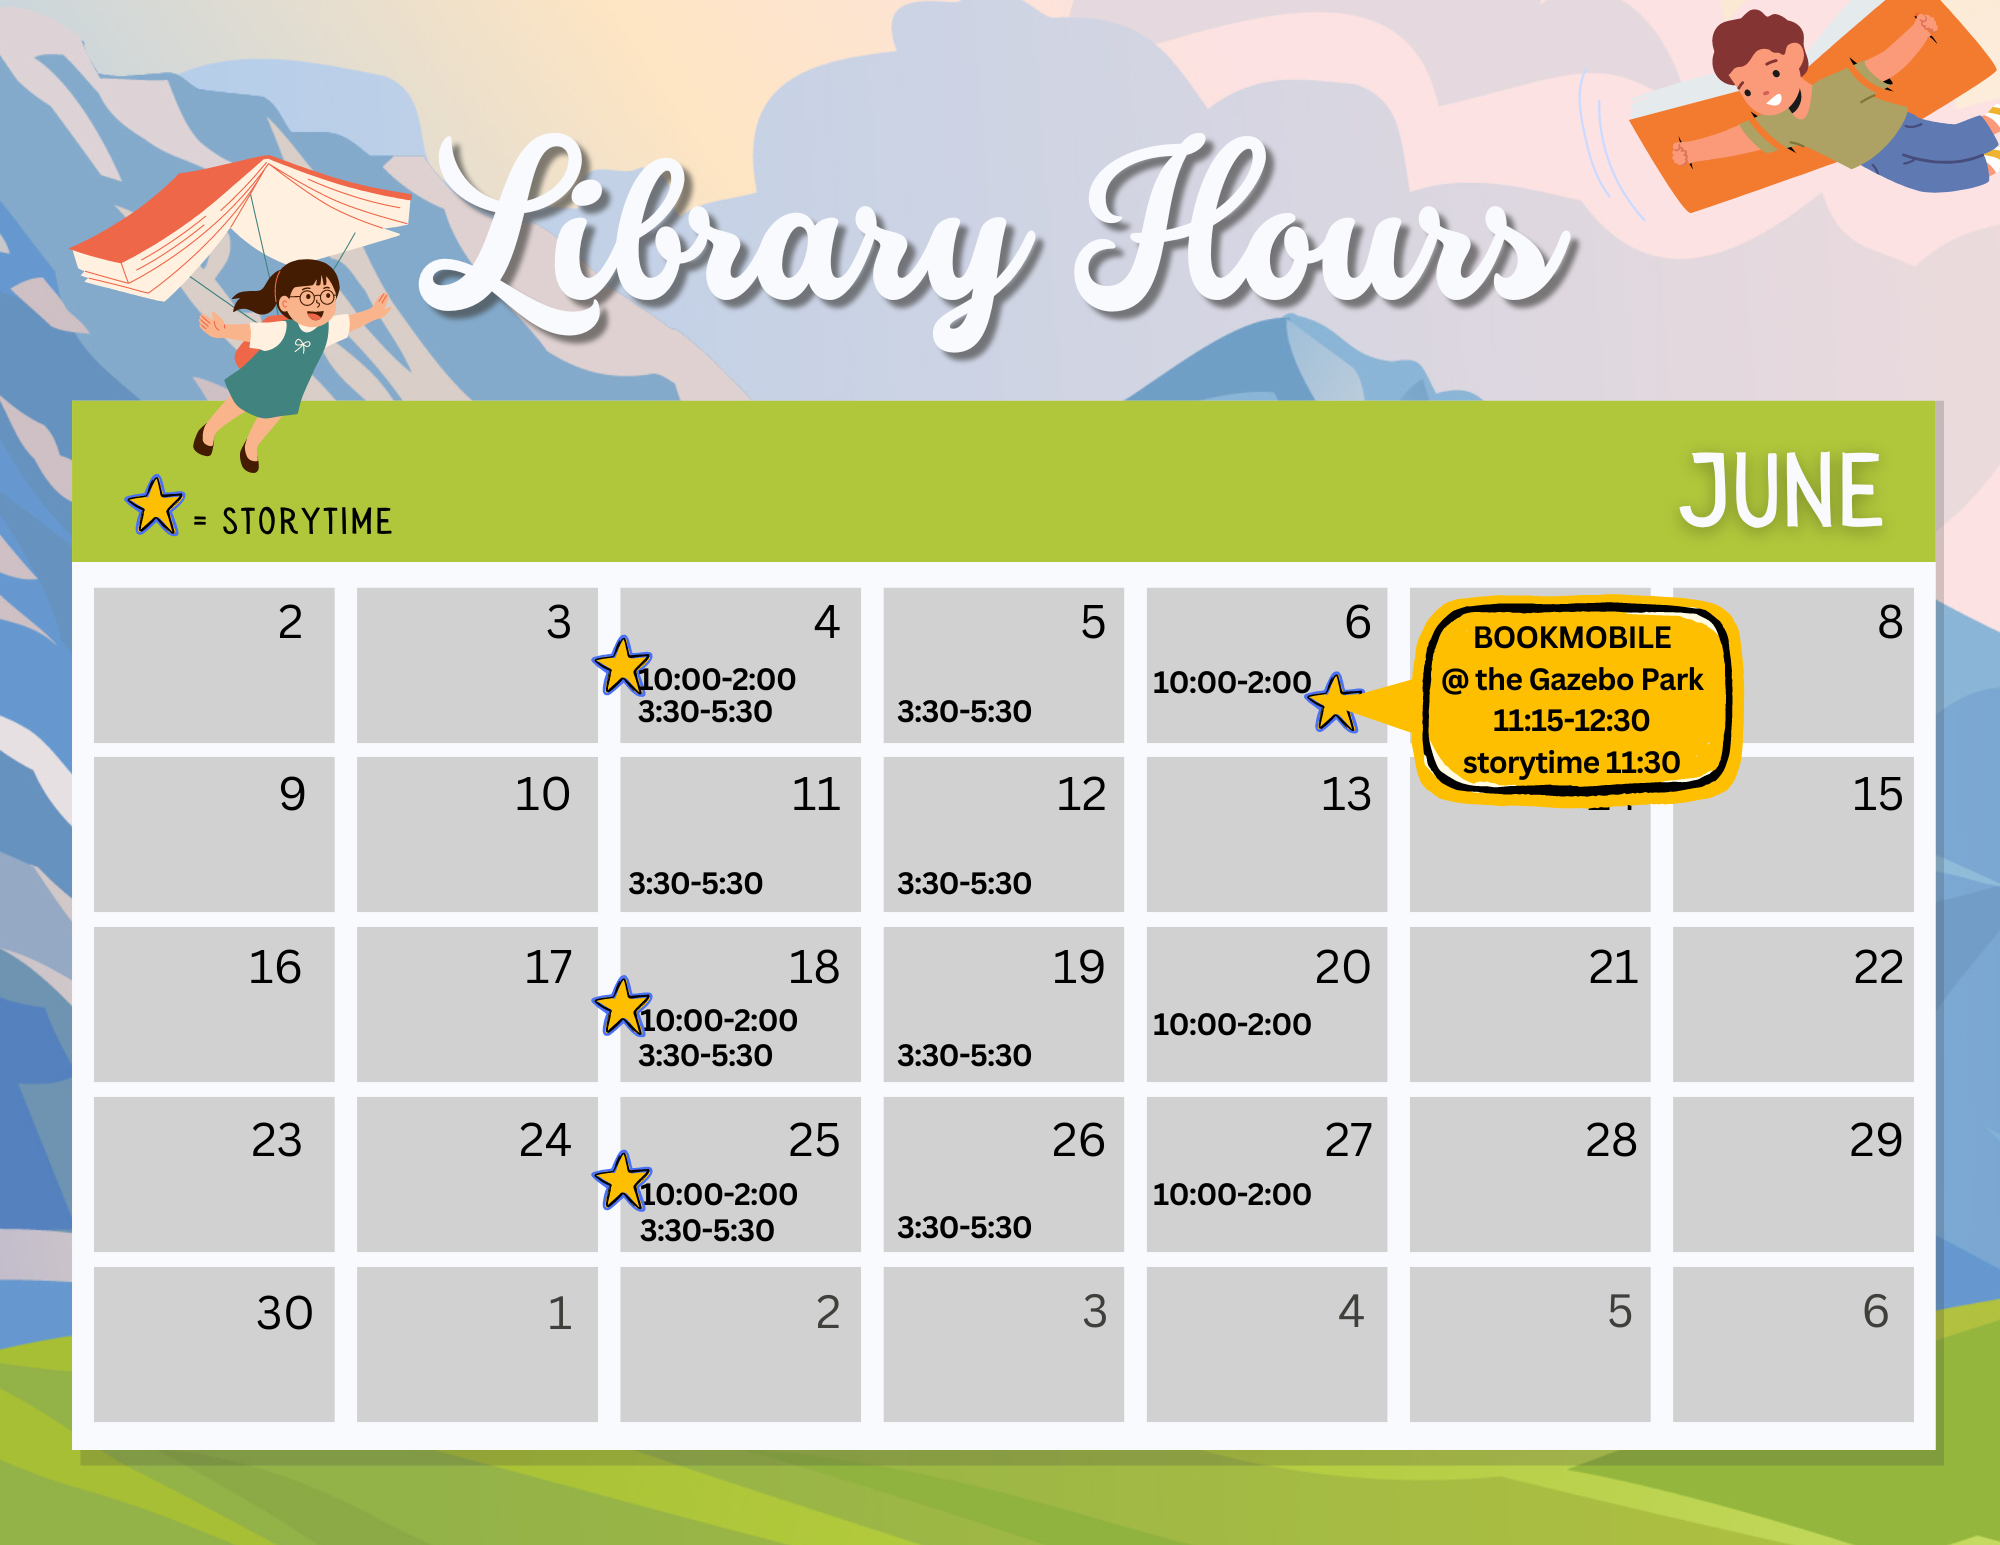 library calendar for June 2024 showing summer storytime dates of june 4th, june 18th, june 25th at 10:00 am